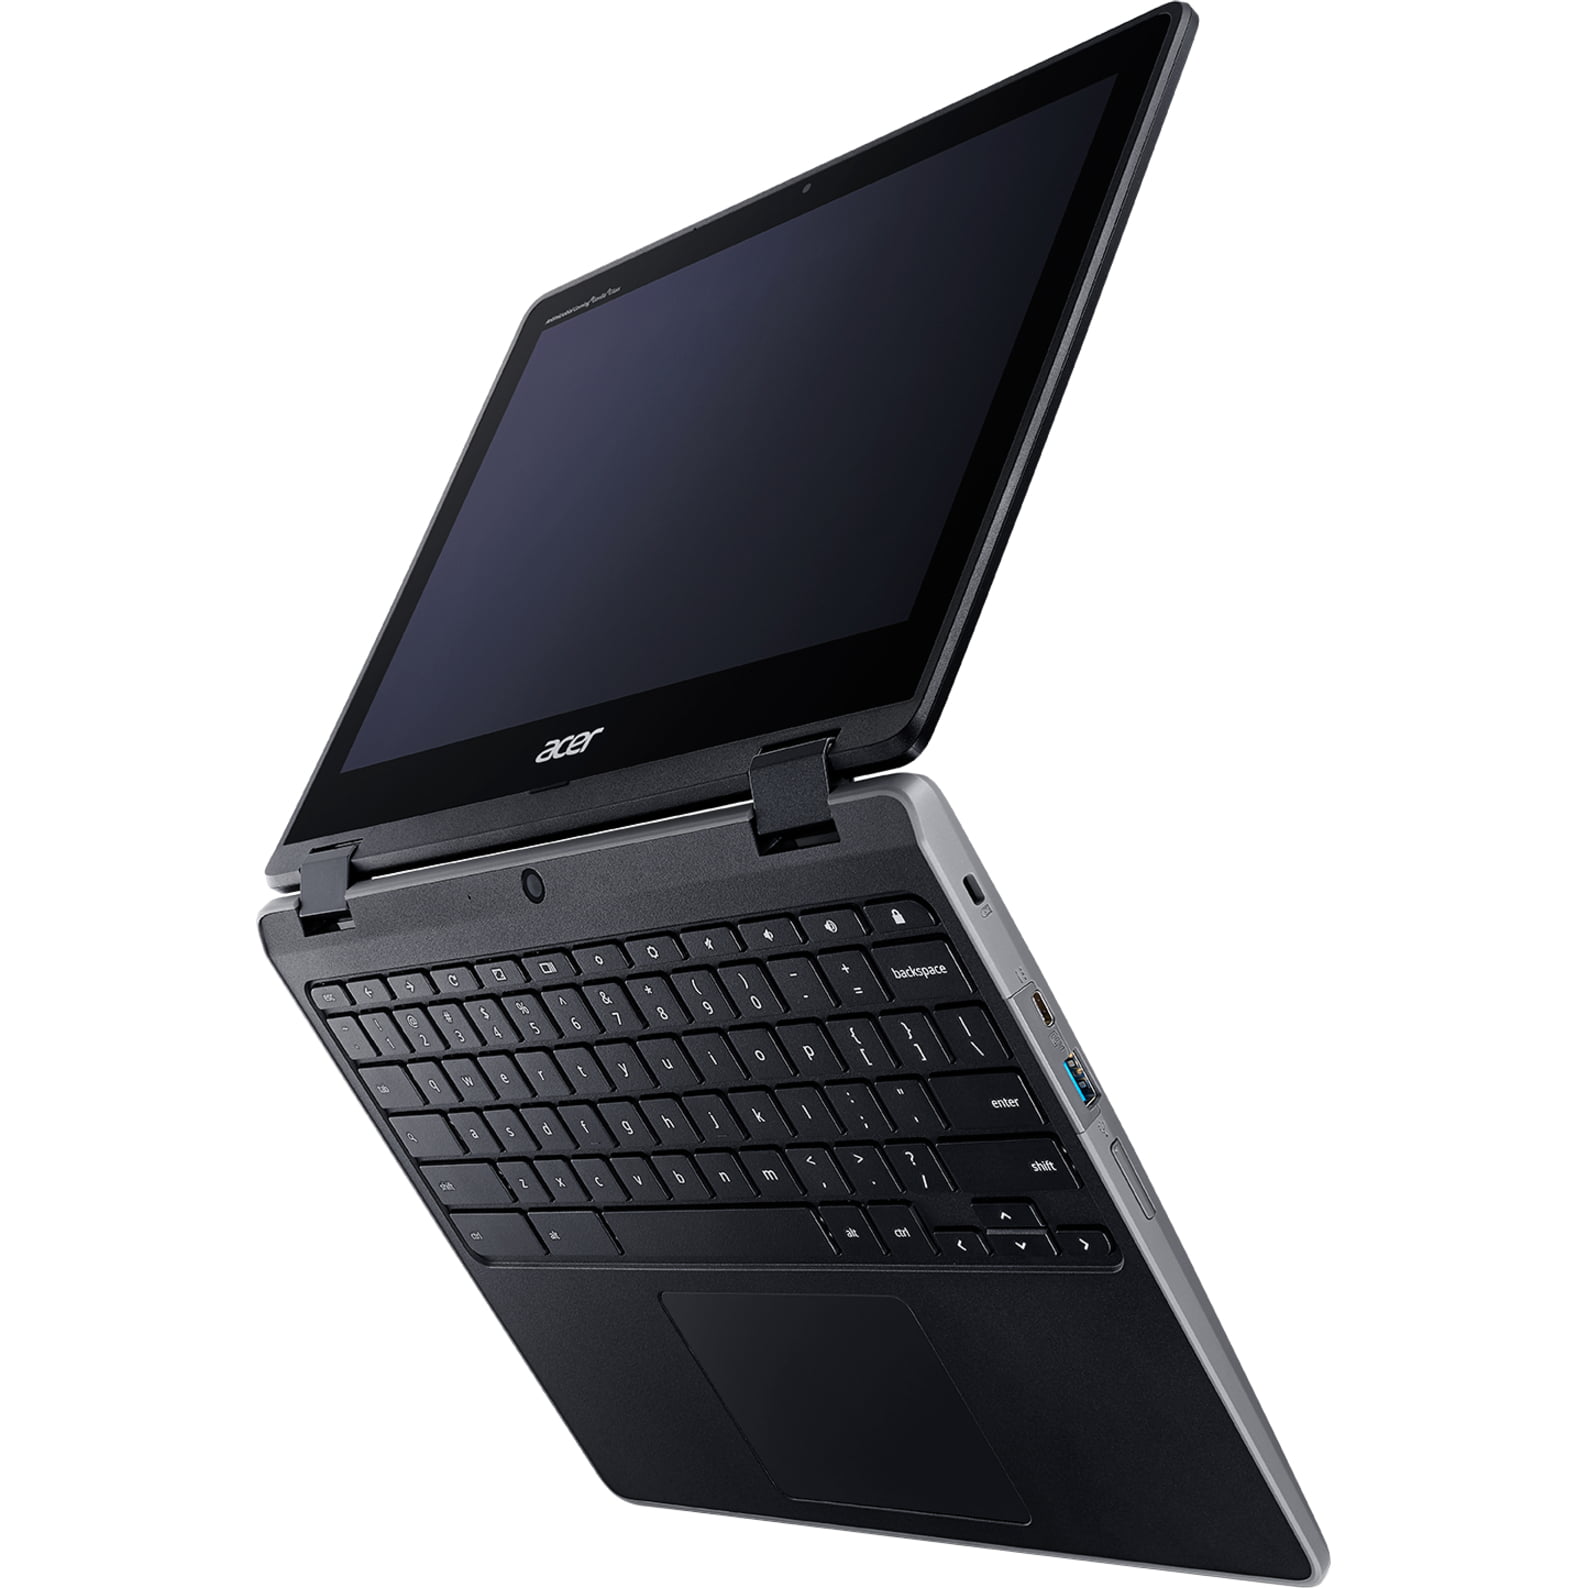 PC PORTABLE NEUF : ACER CHROMEBOOK SPIN 512 R852T - 12 POUCES